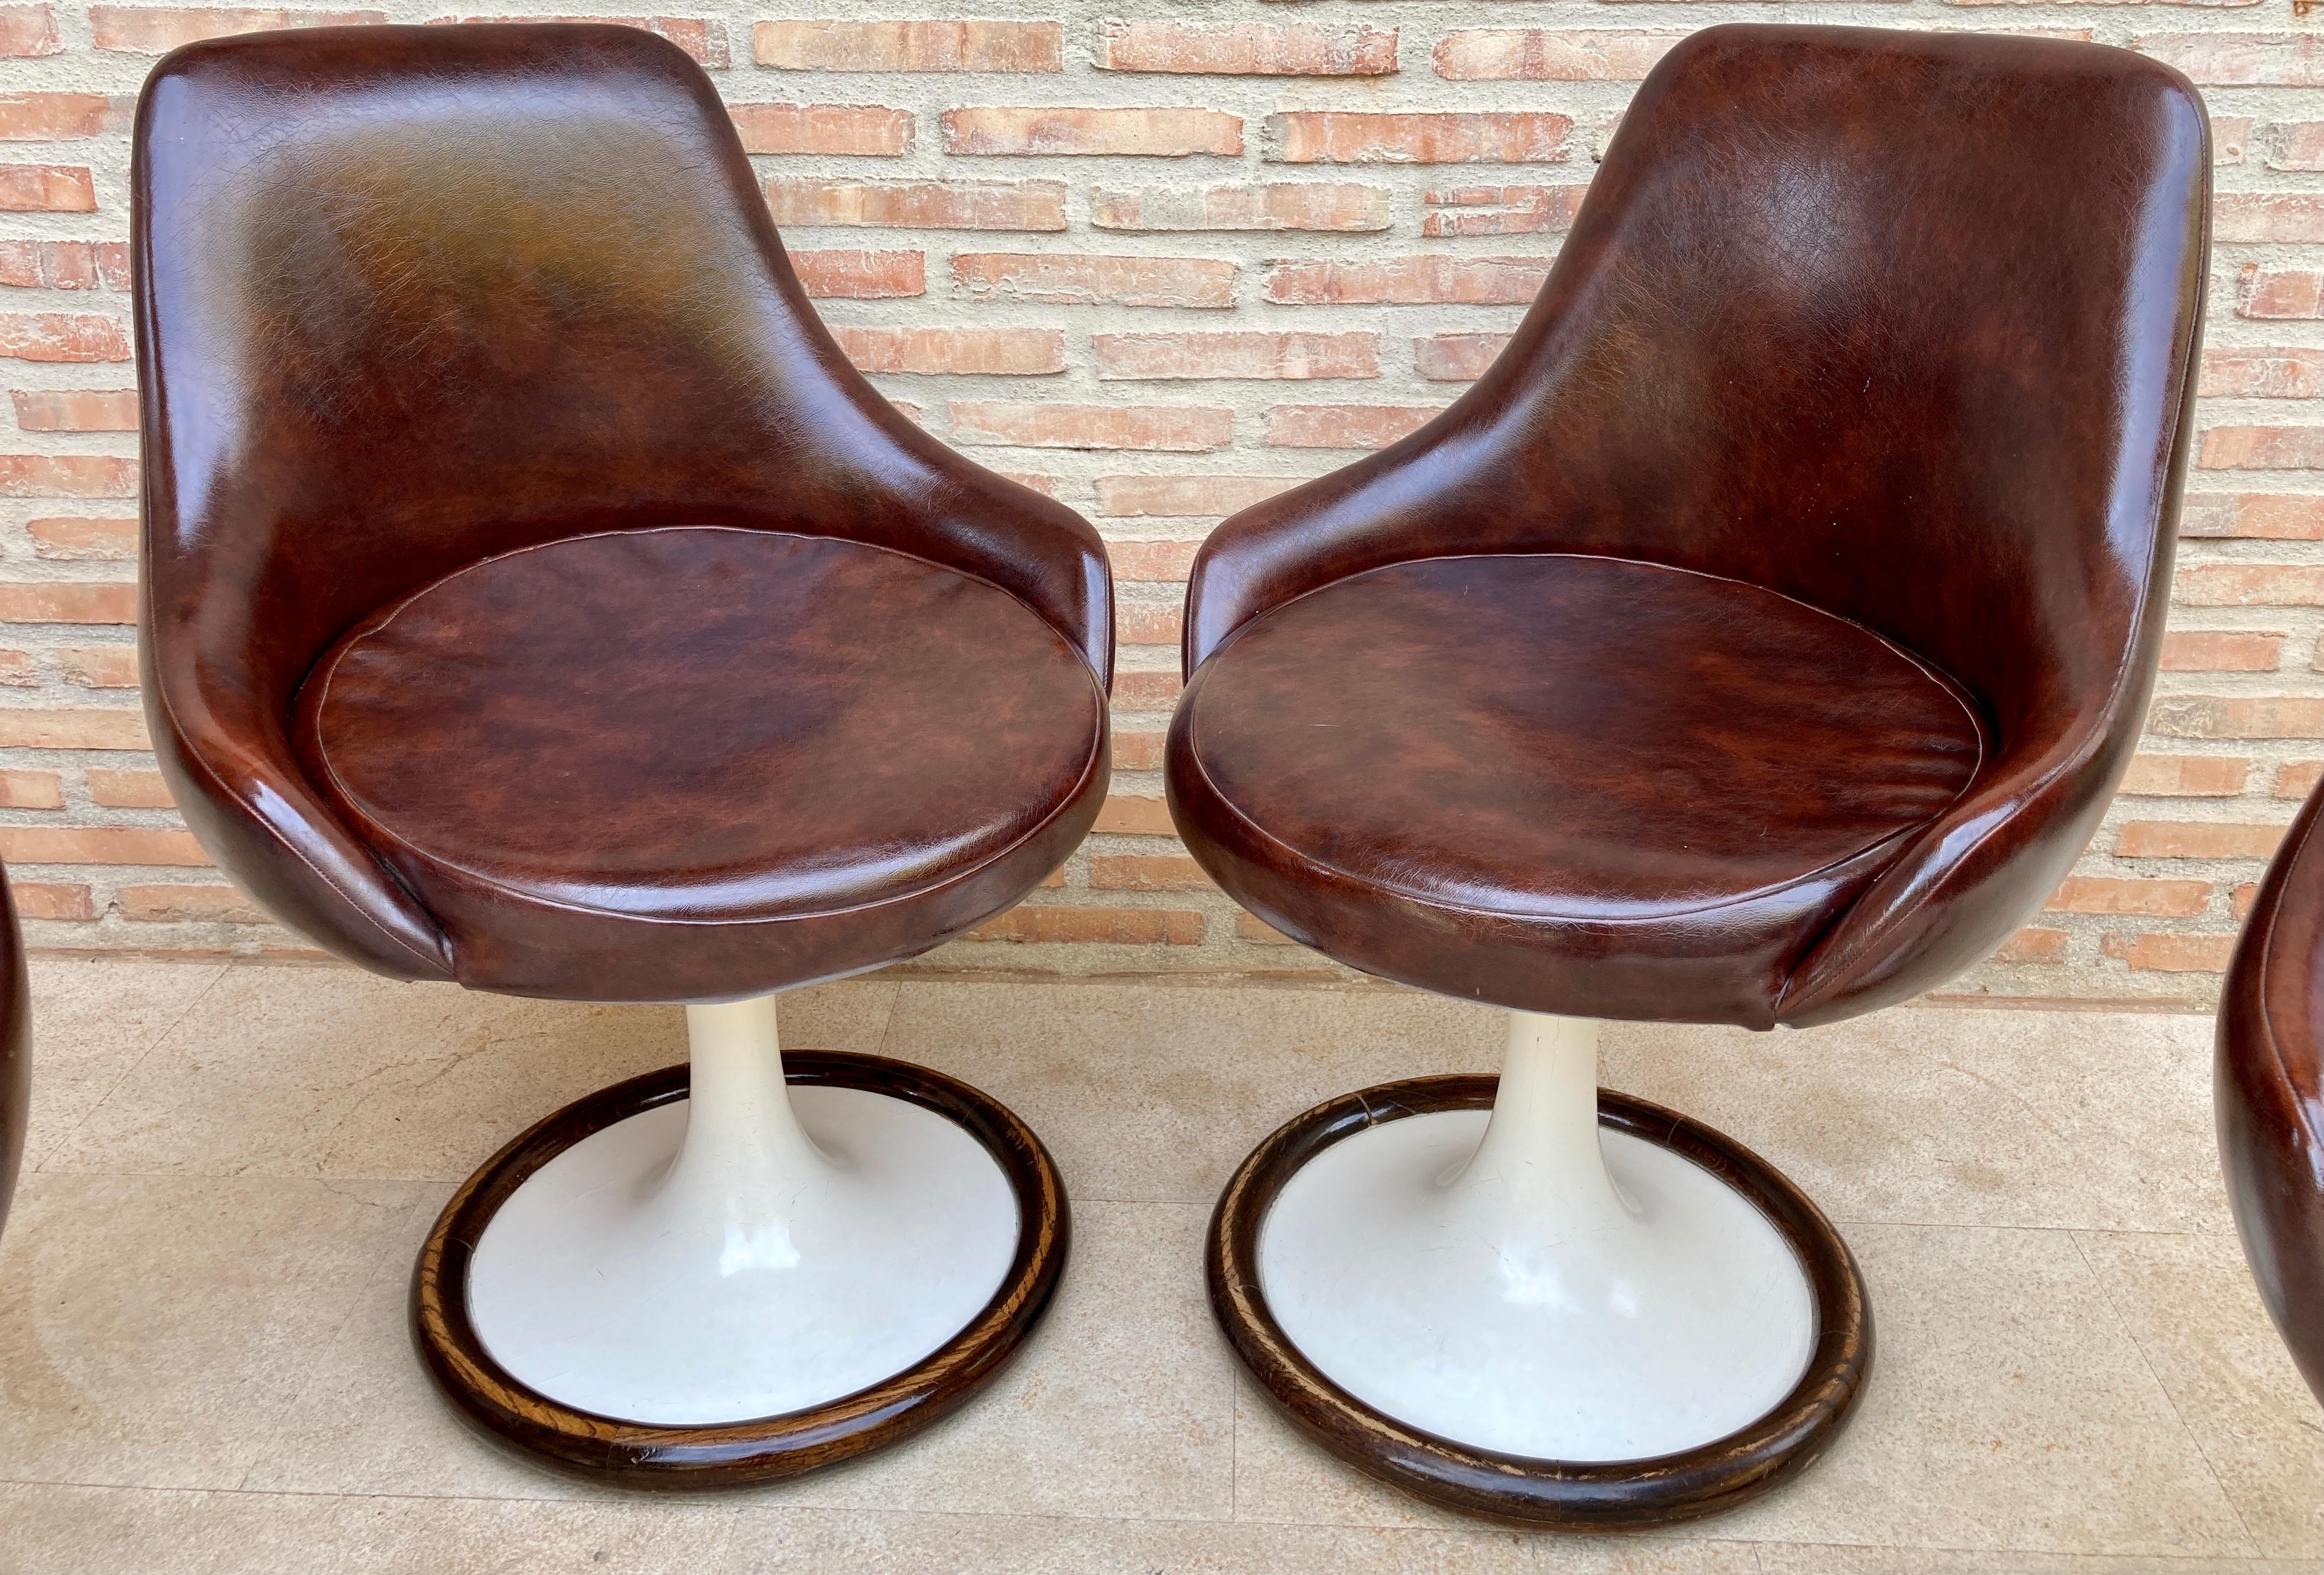 Impressive set of original chairs are made of white plastic and wood base. The seat is upholstered in original brown leather. In good shape. 
Chairs and bases in good condition with only minor marks, consistent with age. Leather is good too.